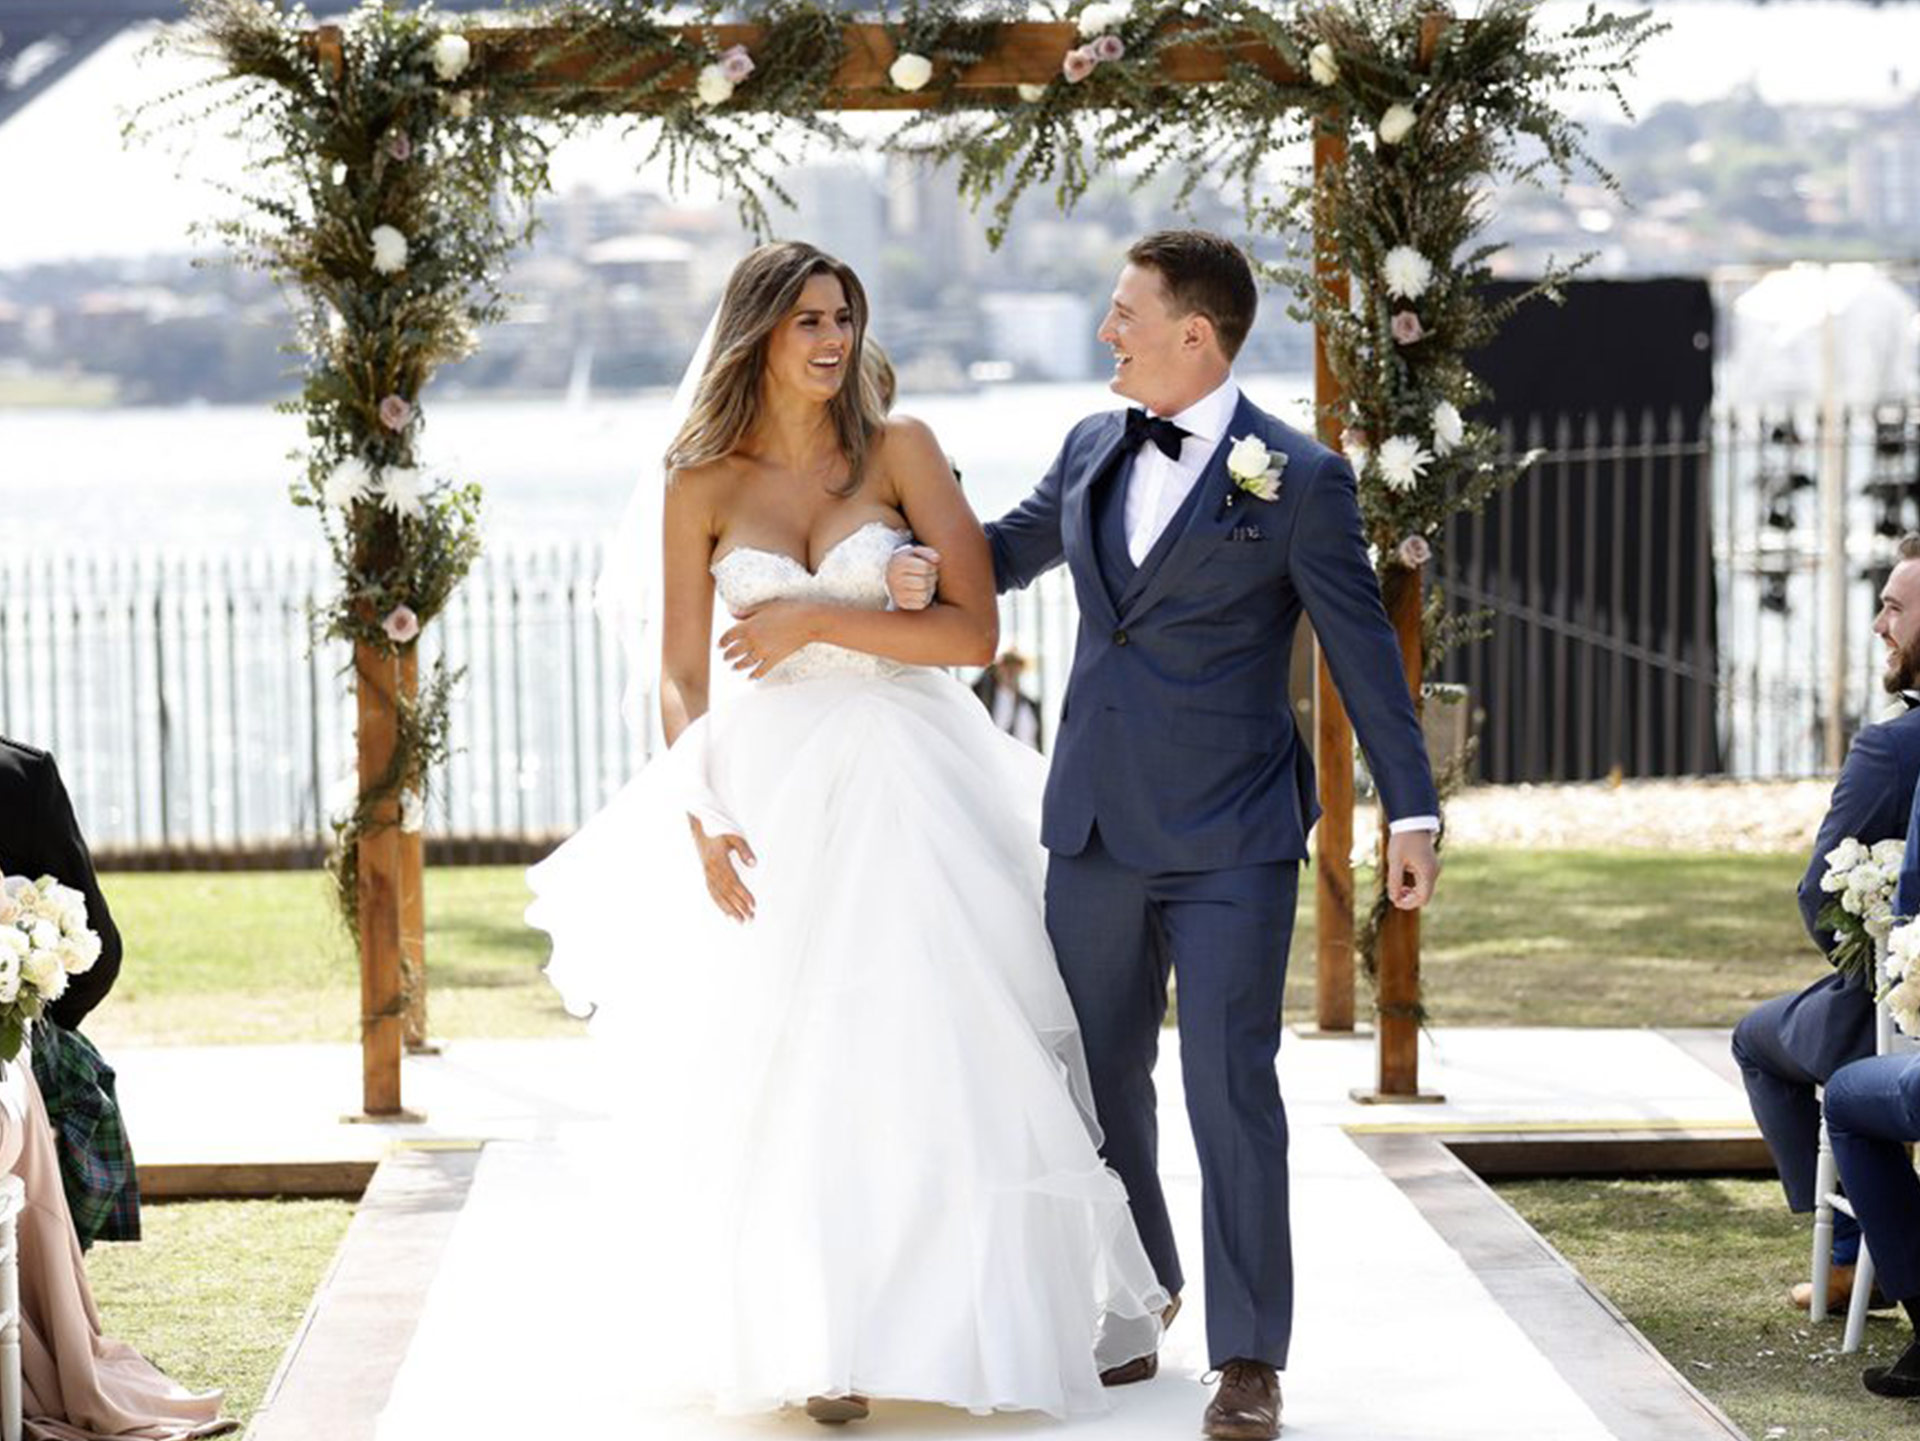 Your first look at Married at First Sight 2018